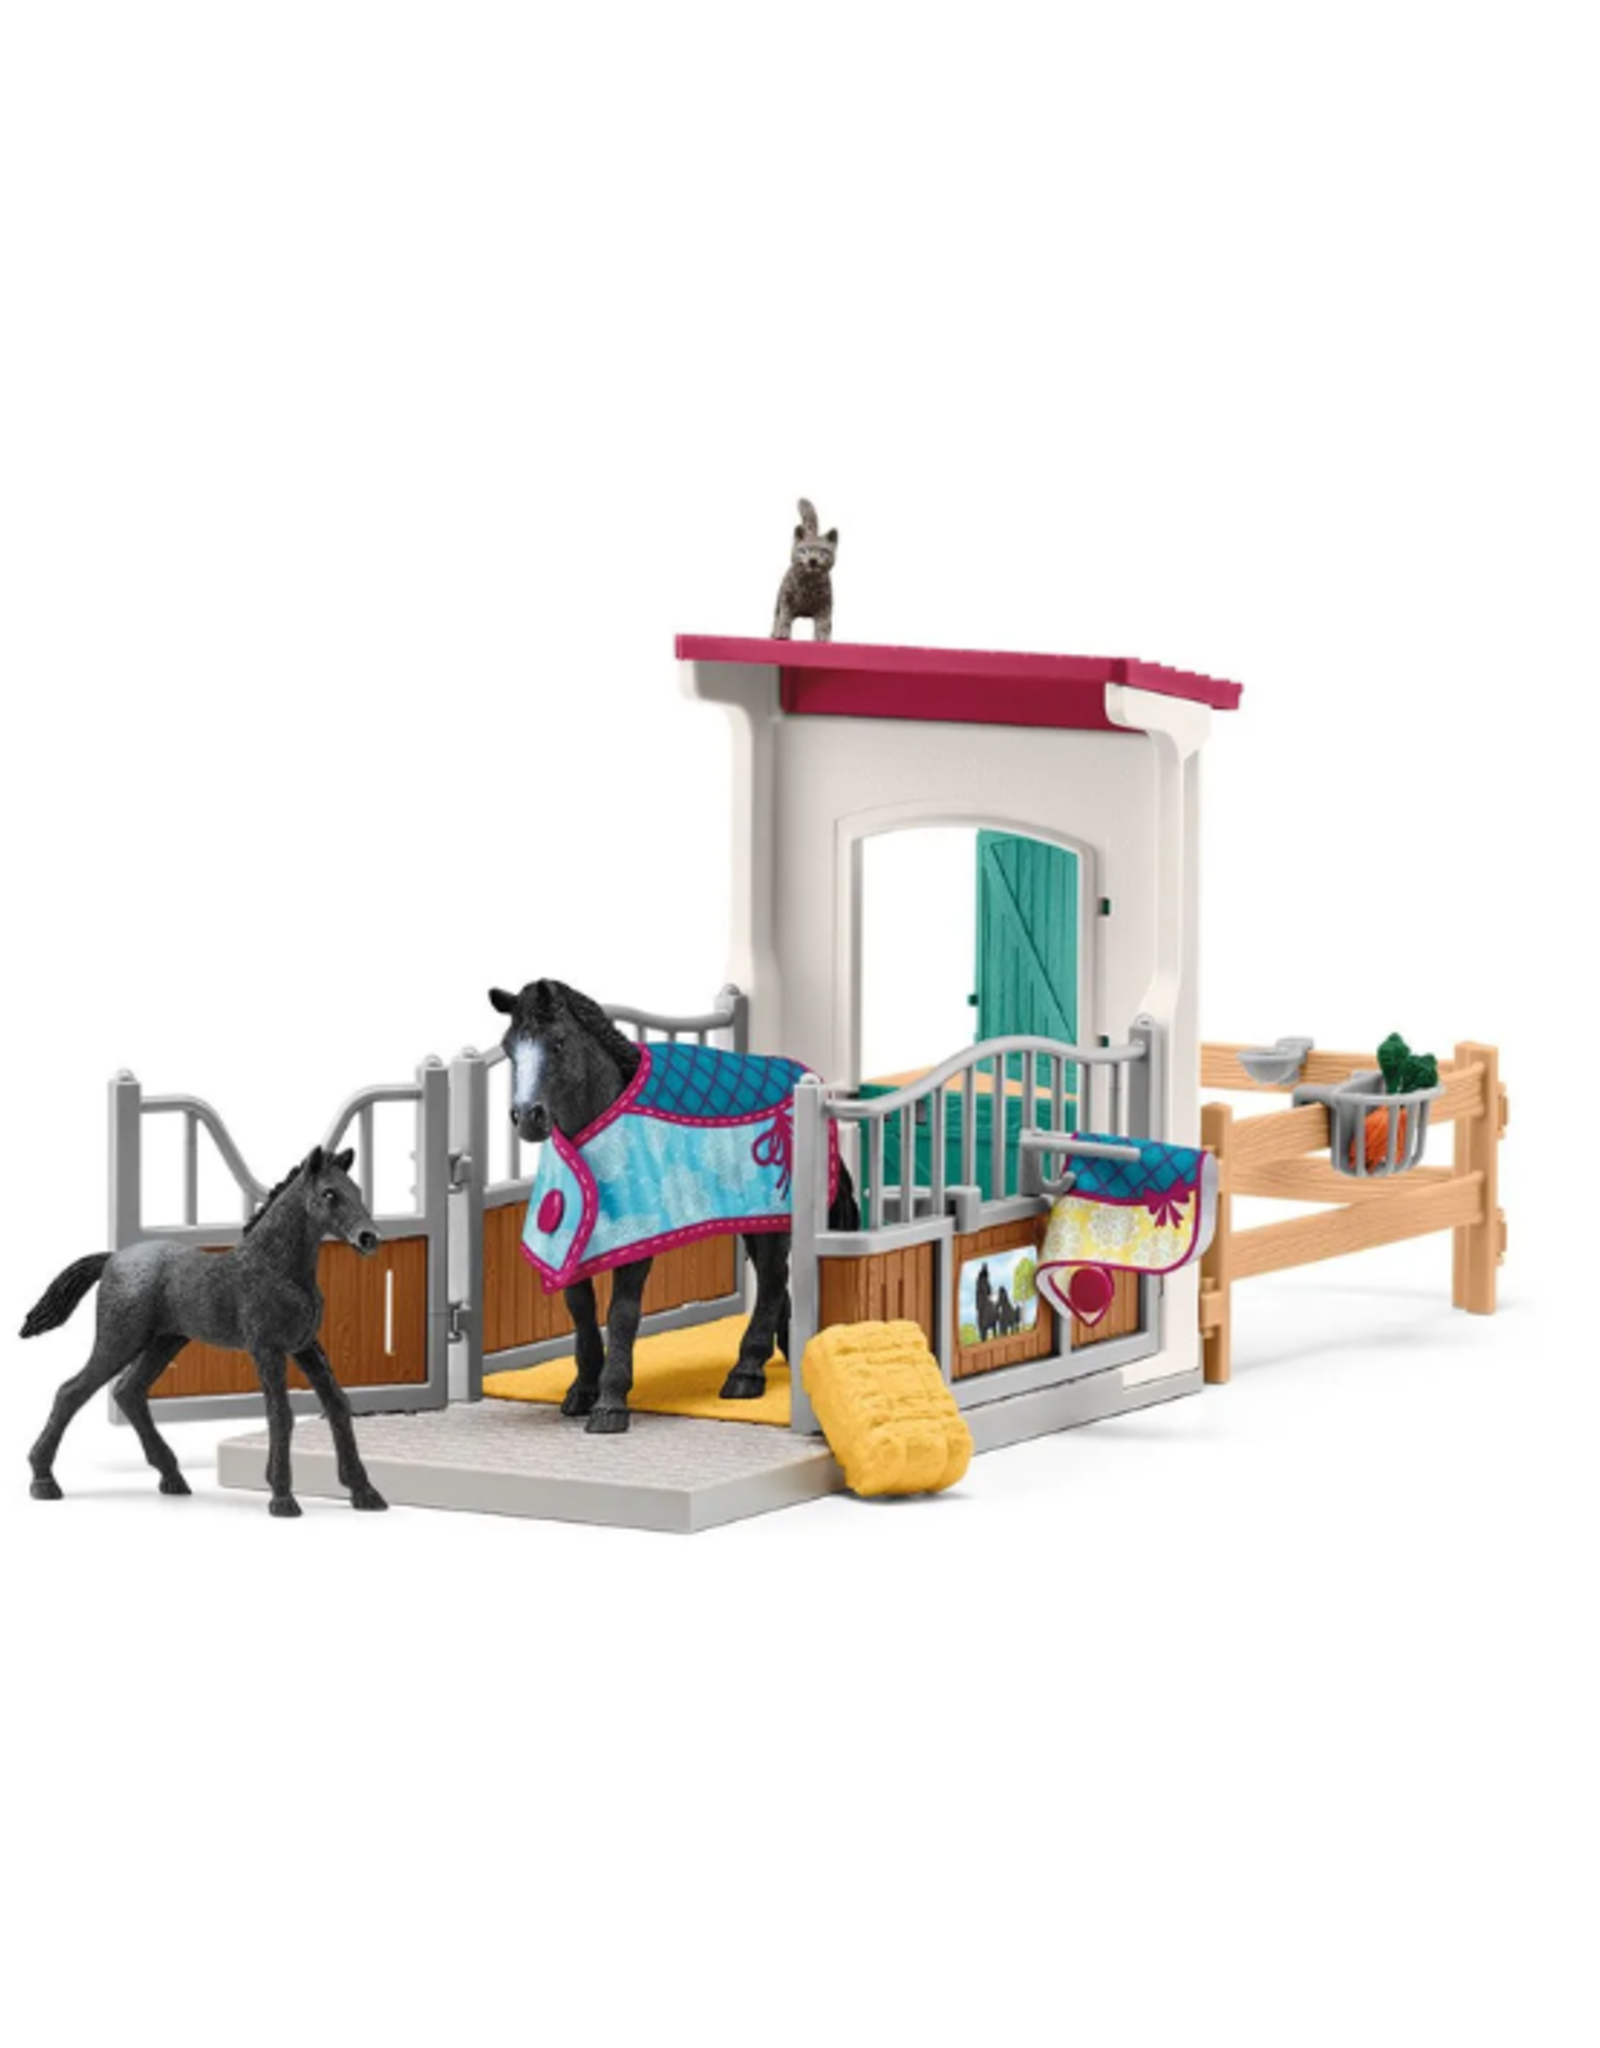 Schleich Schleich - Horse Club - 42611 - Horse Box with Mare and Foal